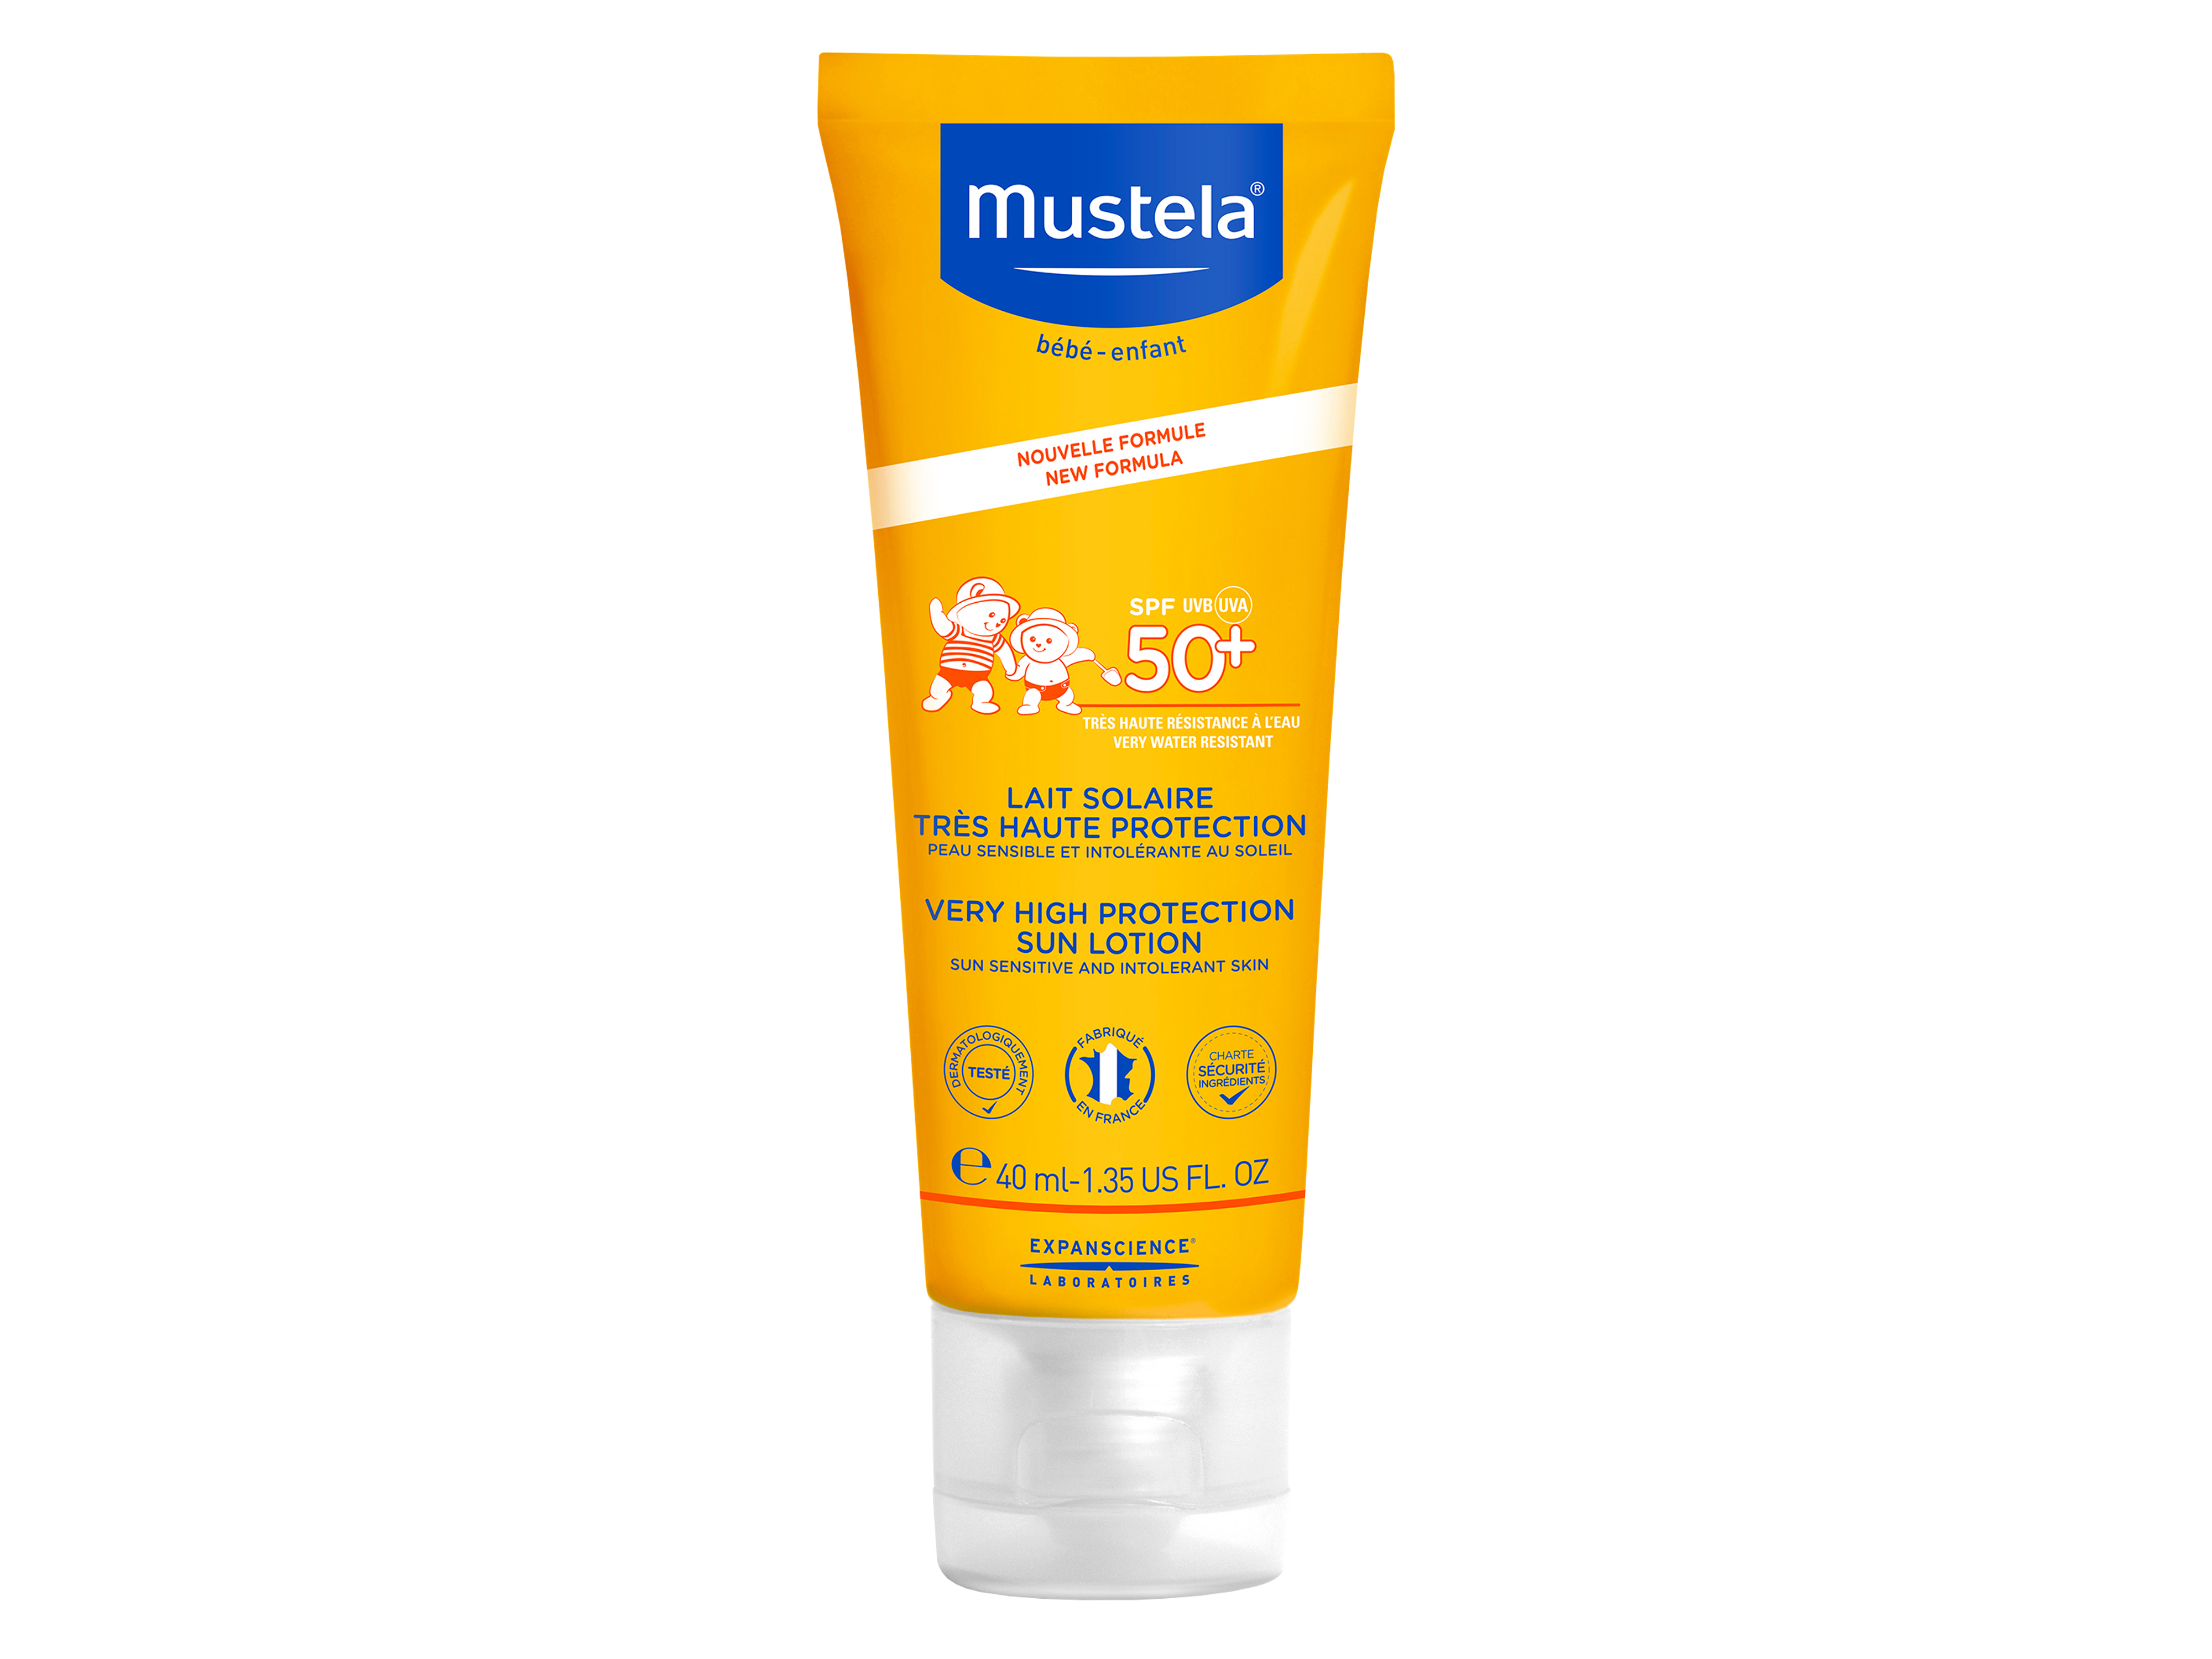 Mustela Very High Protection Face Sun Lotion, SPF 50+, 40 ml